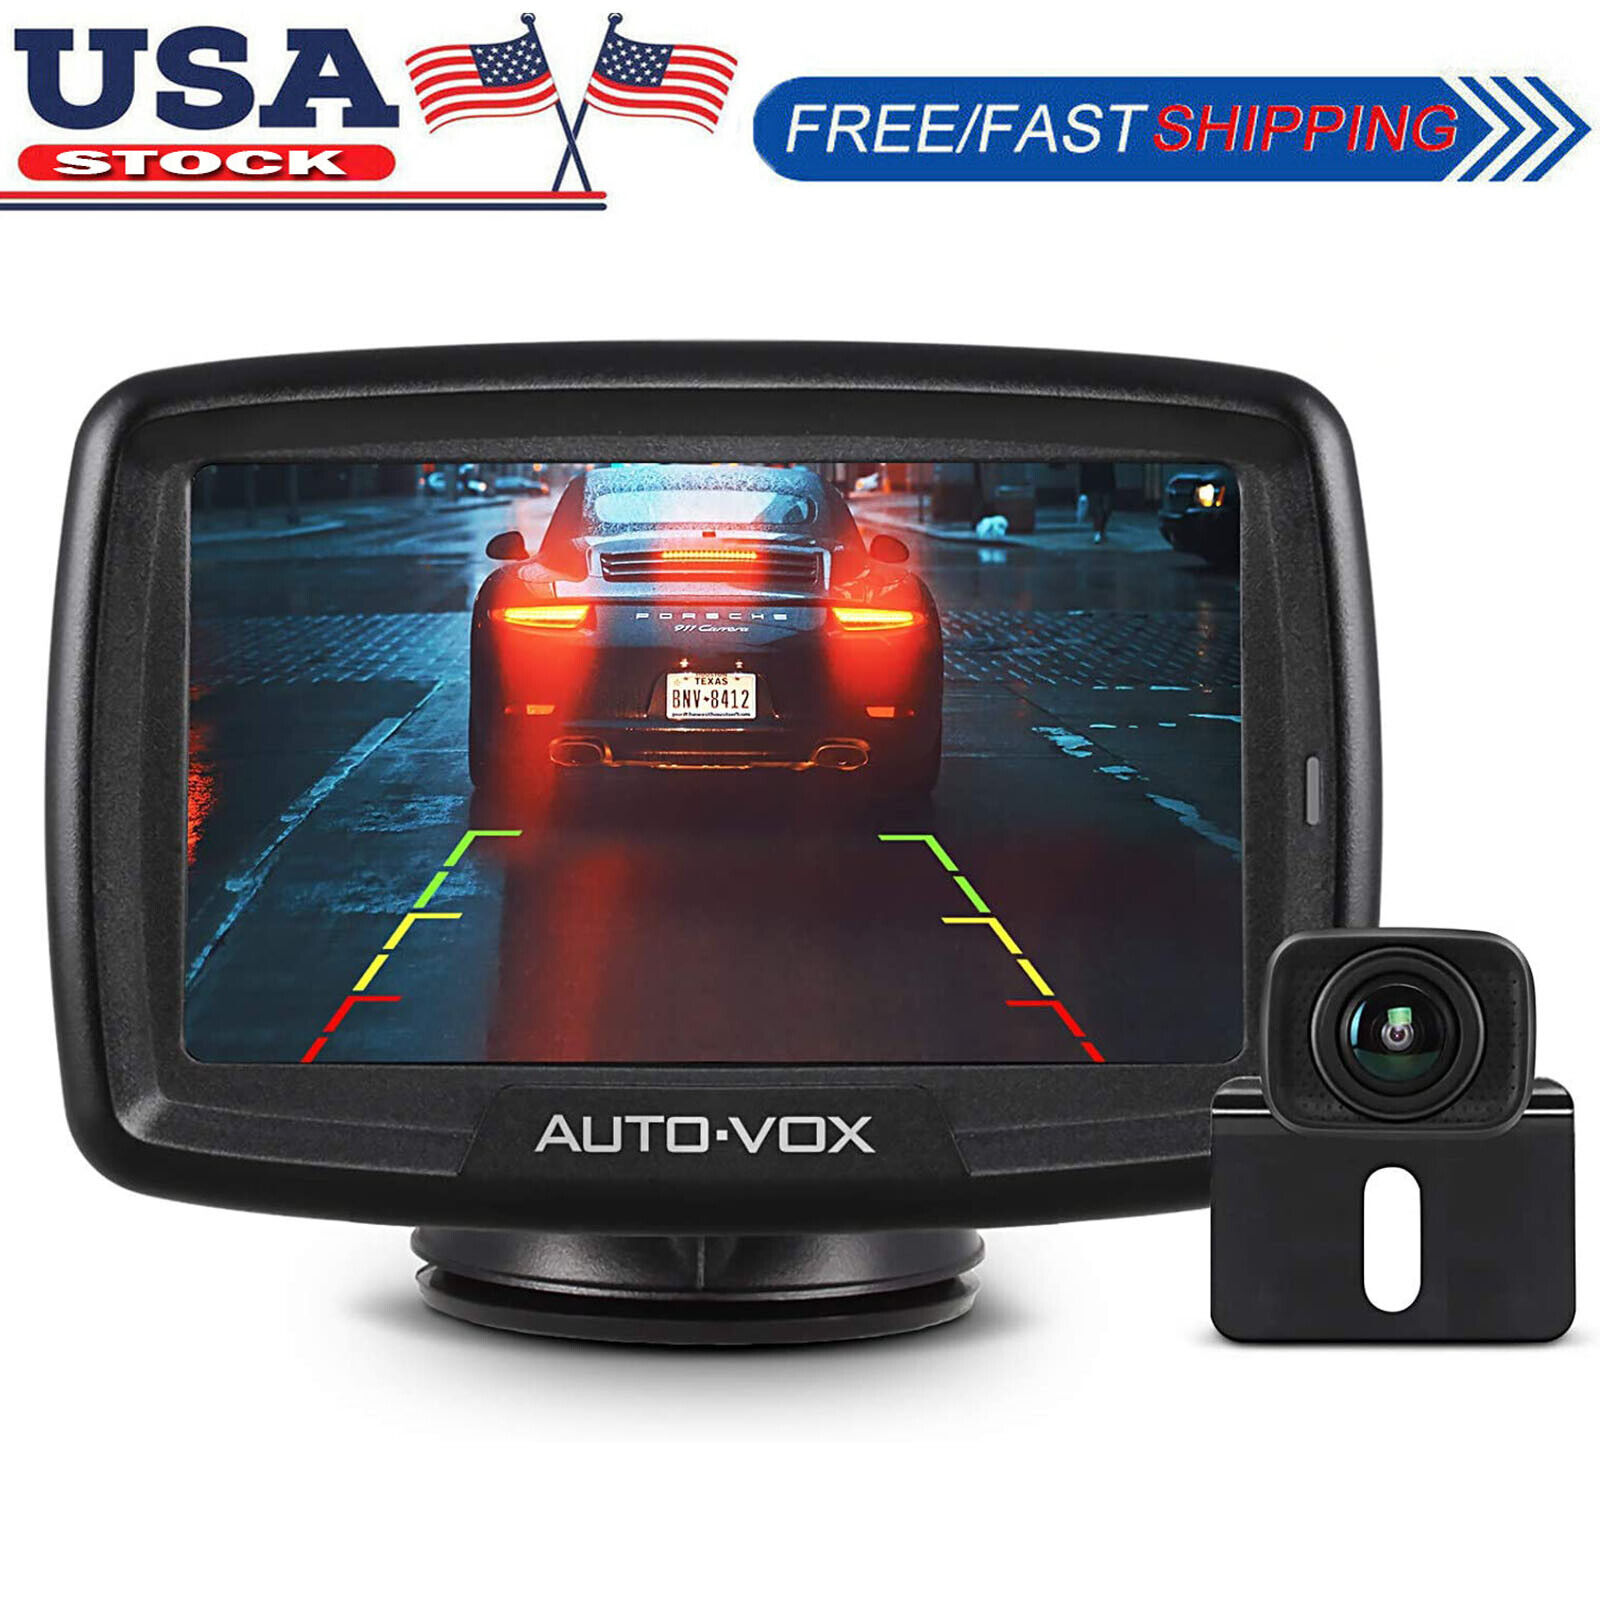 & 4.3" Monitor Car Rear View Parking System